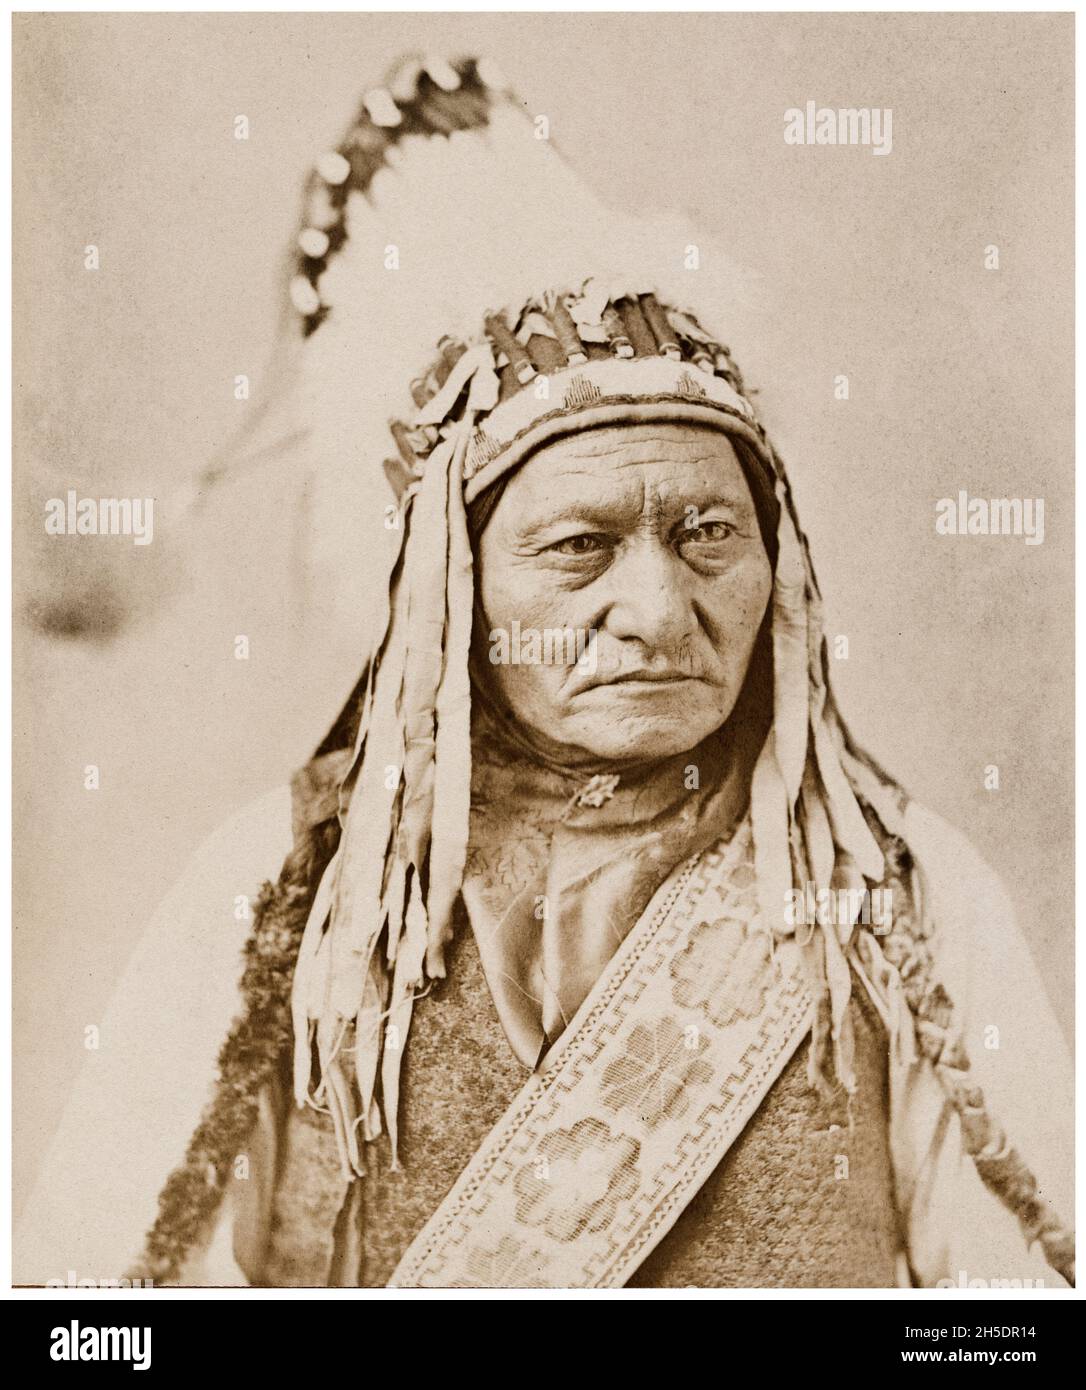 Sitting Bull (1831-1890), Native American Sioux Chief, portrait photograph by William Notman, circa 1885 Stock Photo